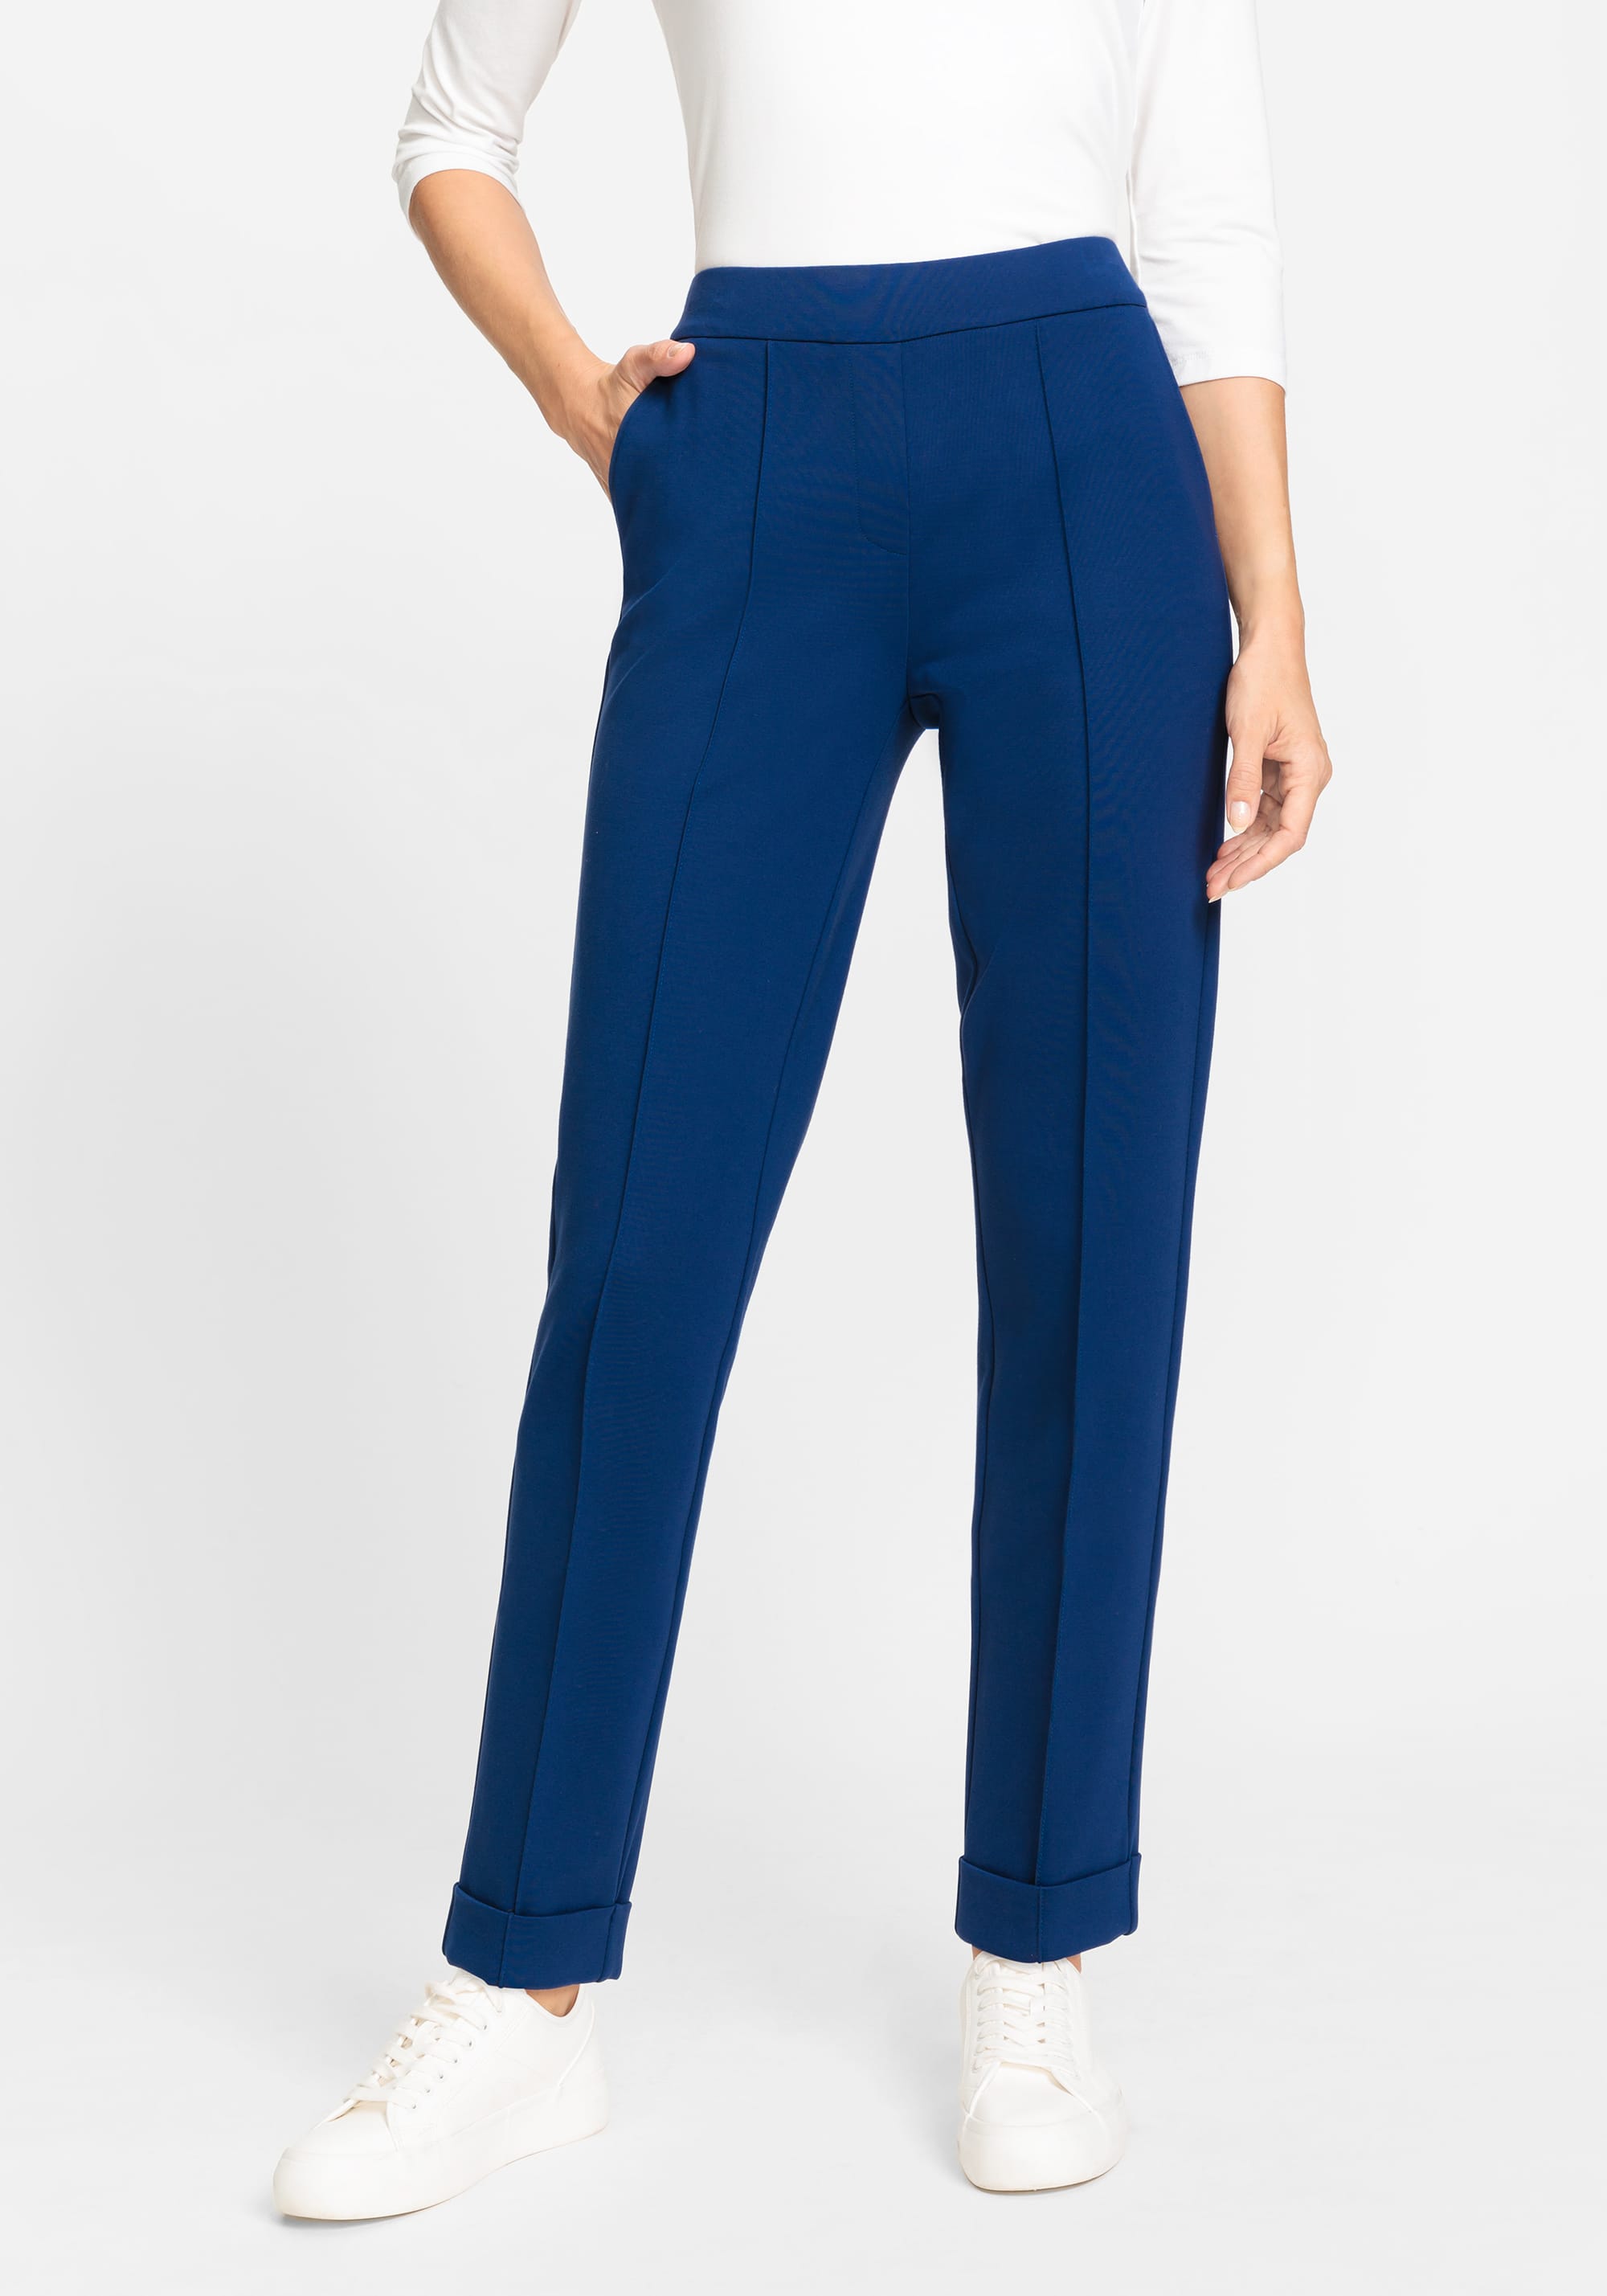 Thin Her Full Length Pull On Pants in Navy – Martha's On the Square